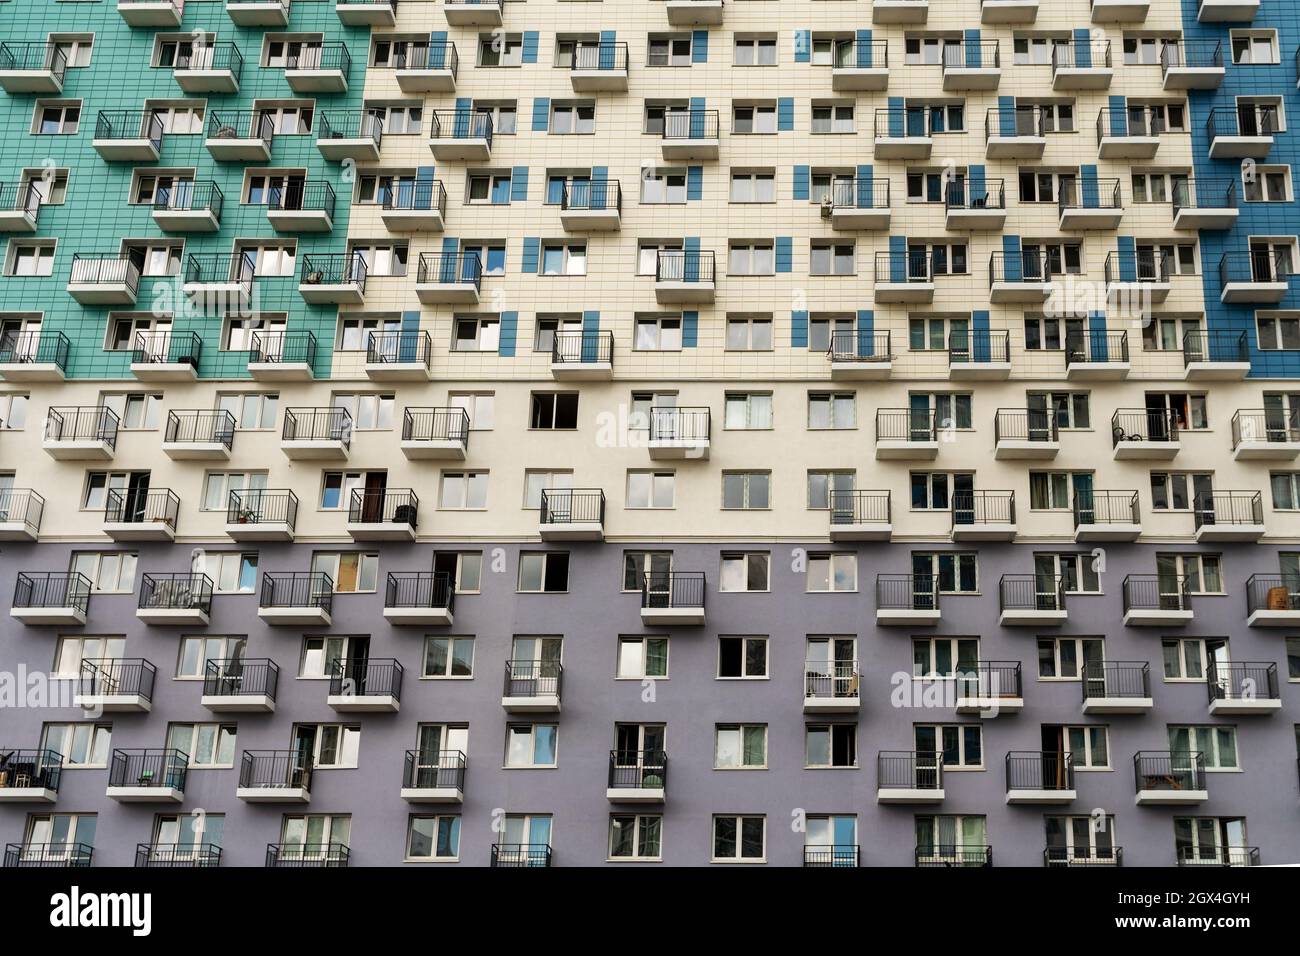 The facade of a multi-apartment new residential building with balconies and windows, painted in 3 colors. Stock Photo